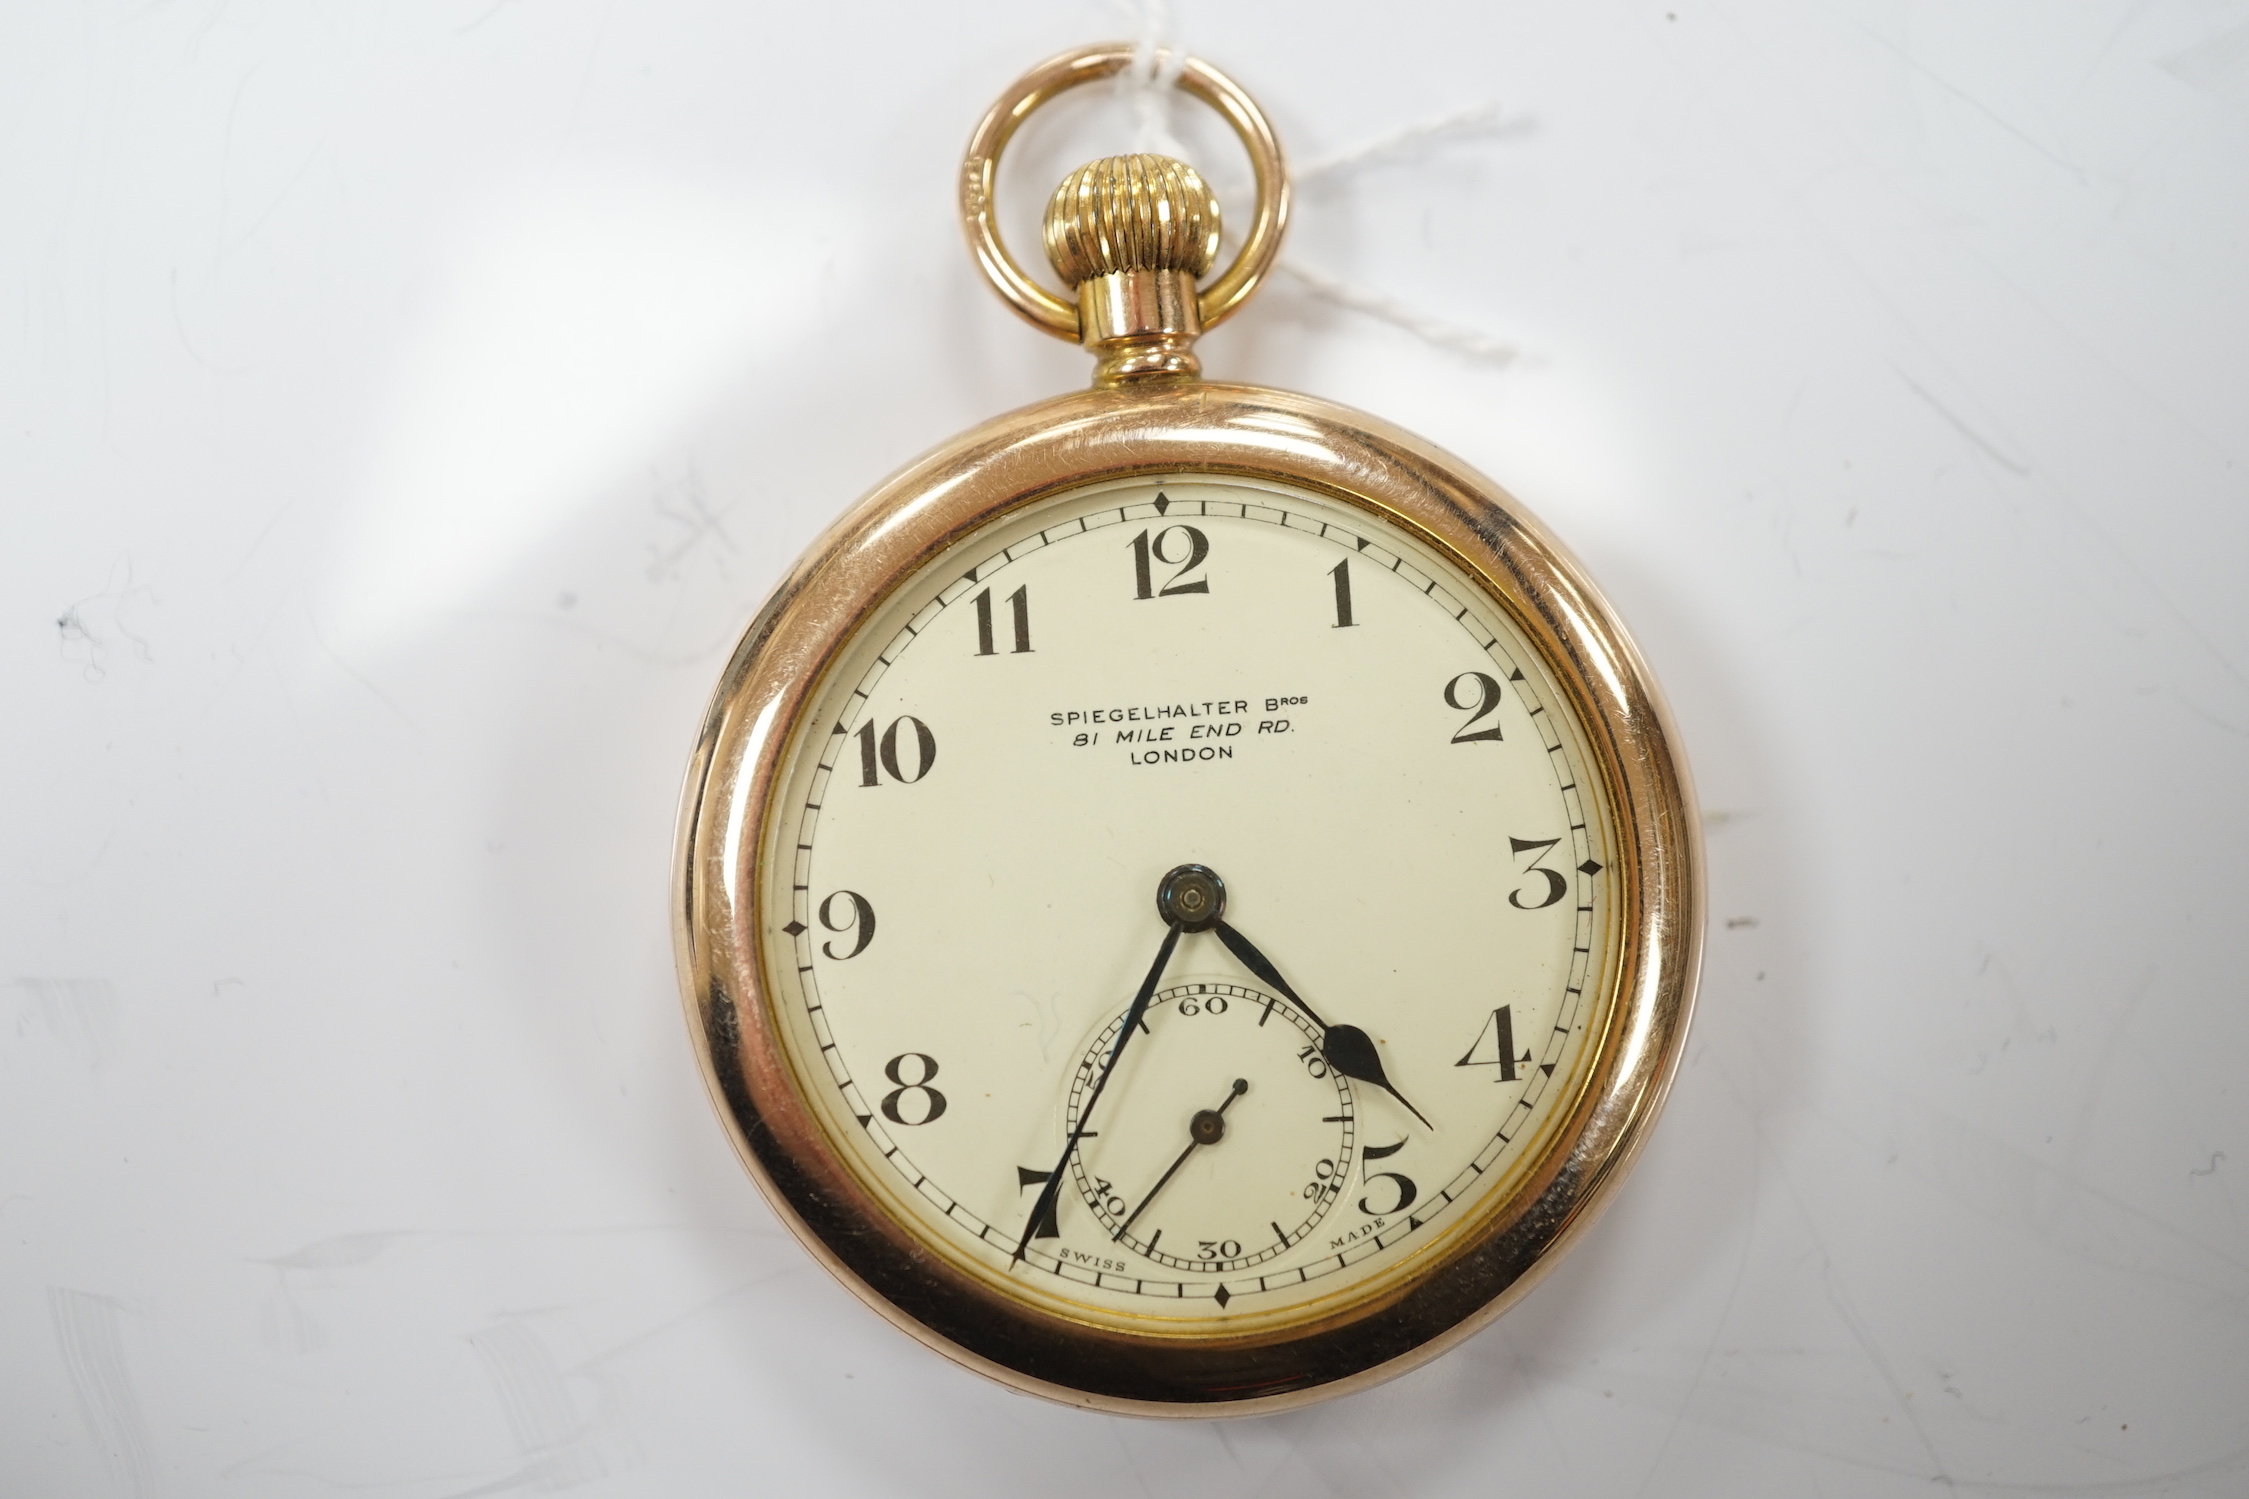 An early 20th century 9ct gold open face pocket watch, retailed by Spiegelhalter Bros, with Arabic dial and subsidiary seconds, case diameter 47mm, gross weight 61.2 grams.